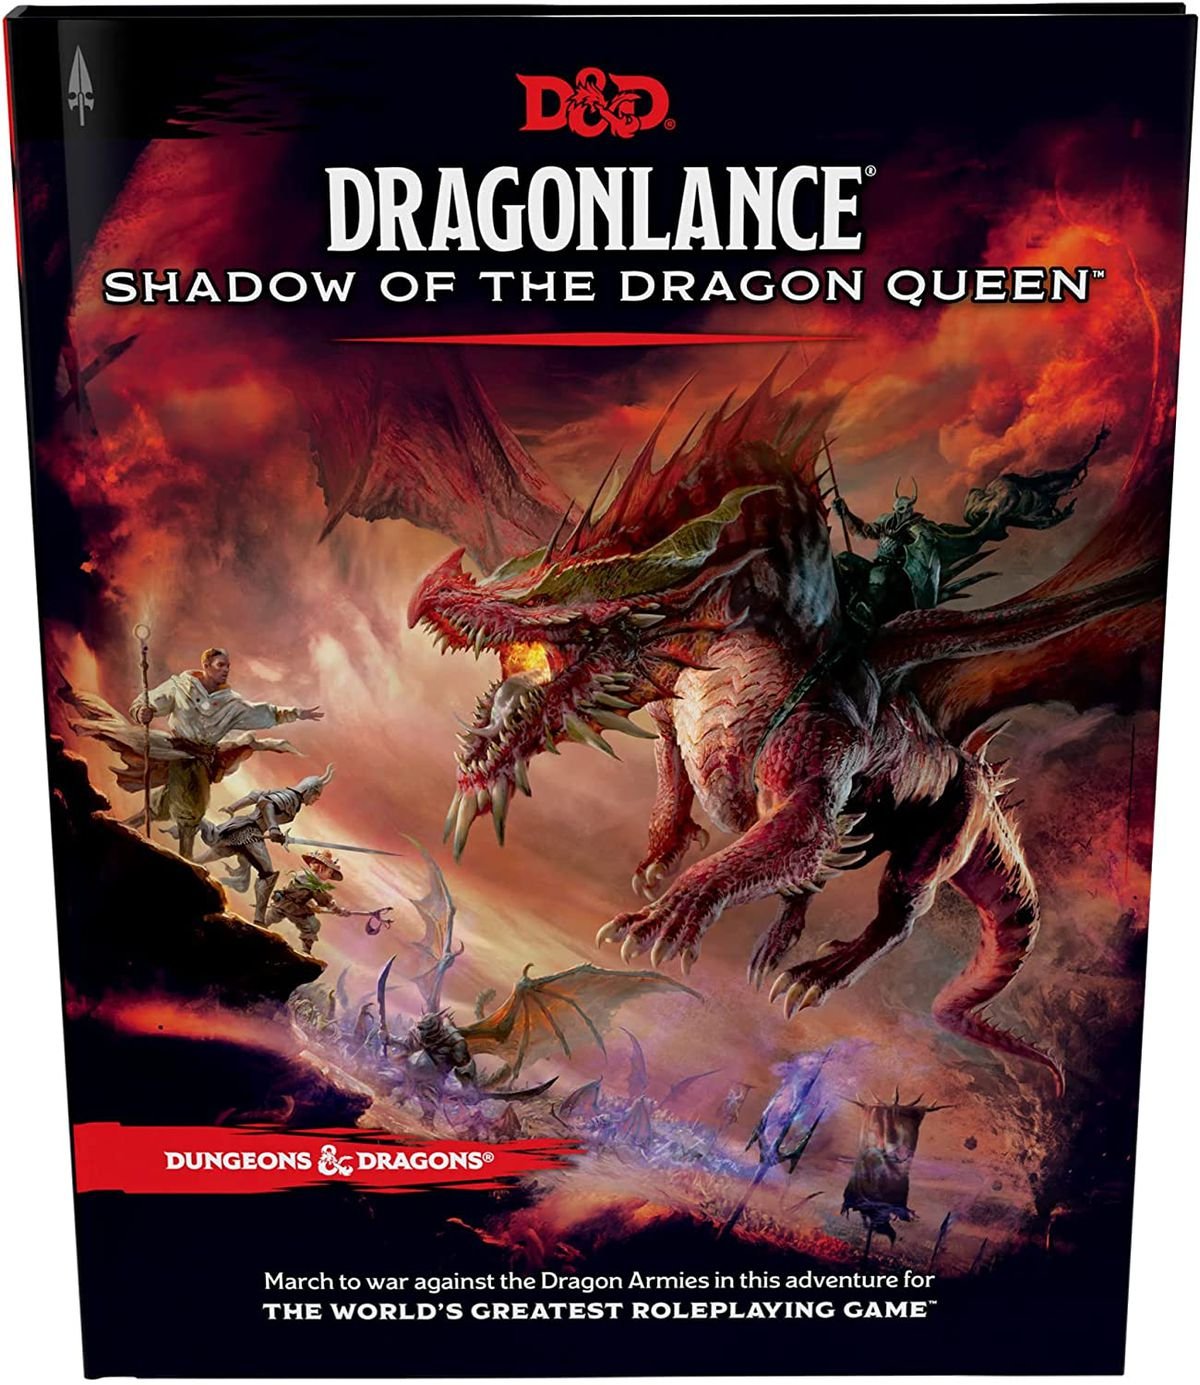 Cover art for Dragonlance: Shadow of the Dragon Queen shows a dragon with a rider hovering next to a cliff face where a party of adventurer’s waits.